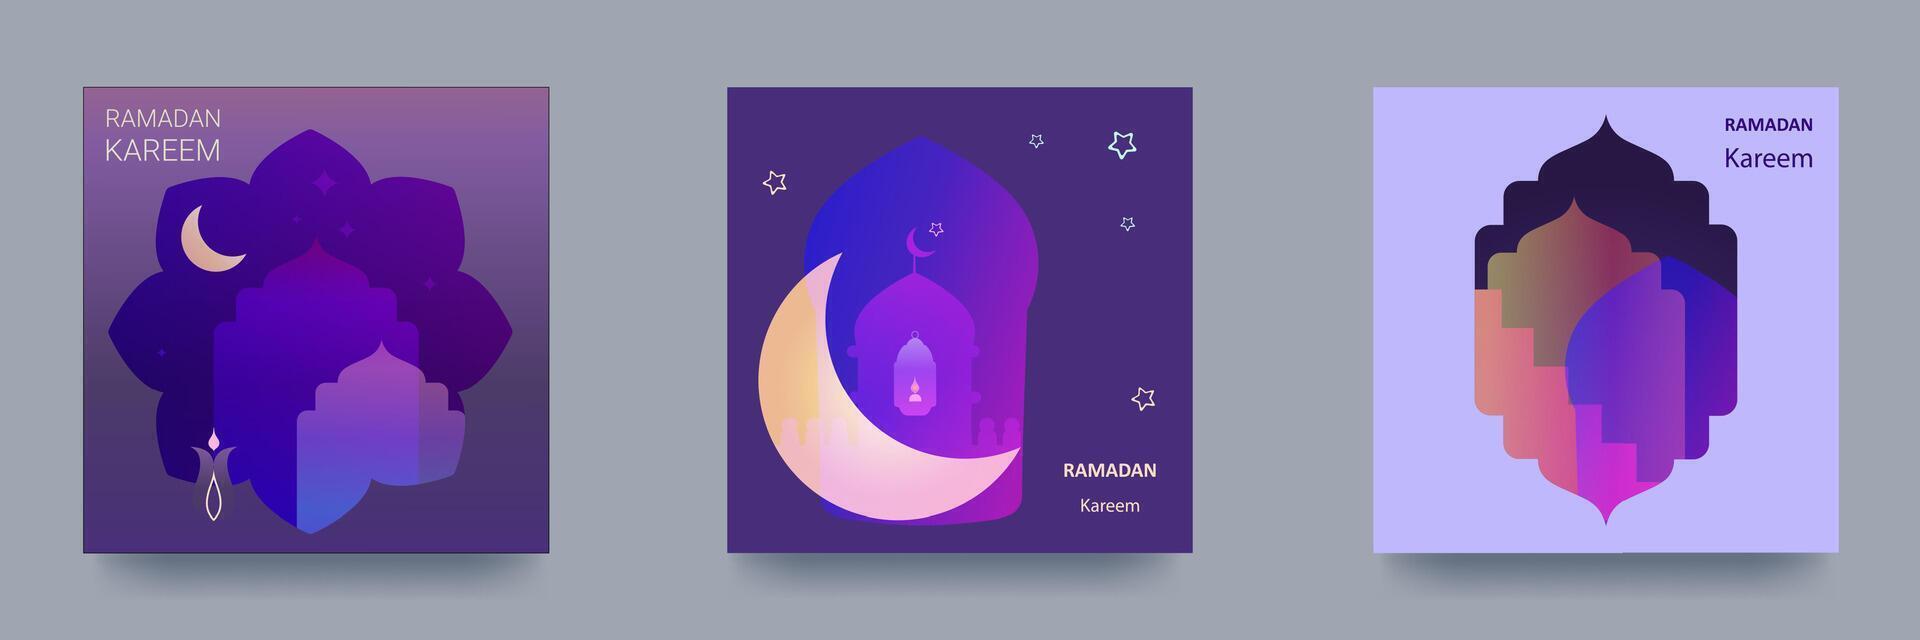 Ramadan Kareem Set of Posters, Holiday Covers, Flyers. Contemporary design in vibrant gradients with mosque, crescent, traditional patterns, arched windows. Vector